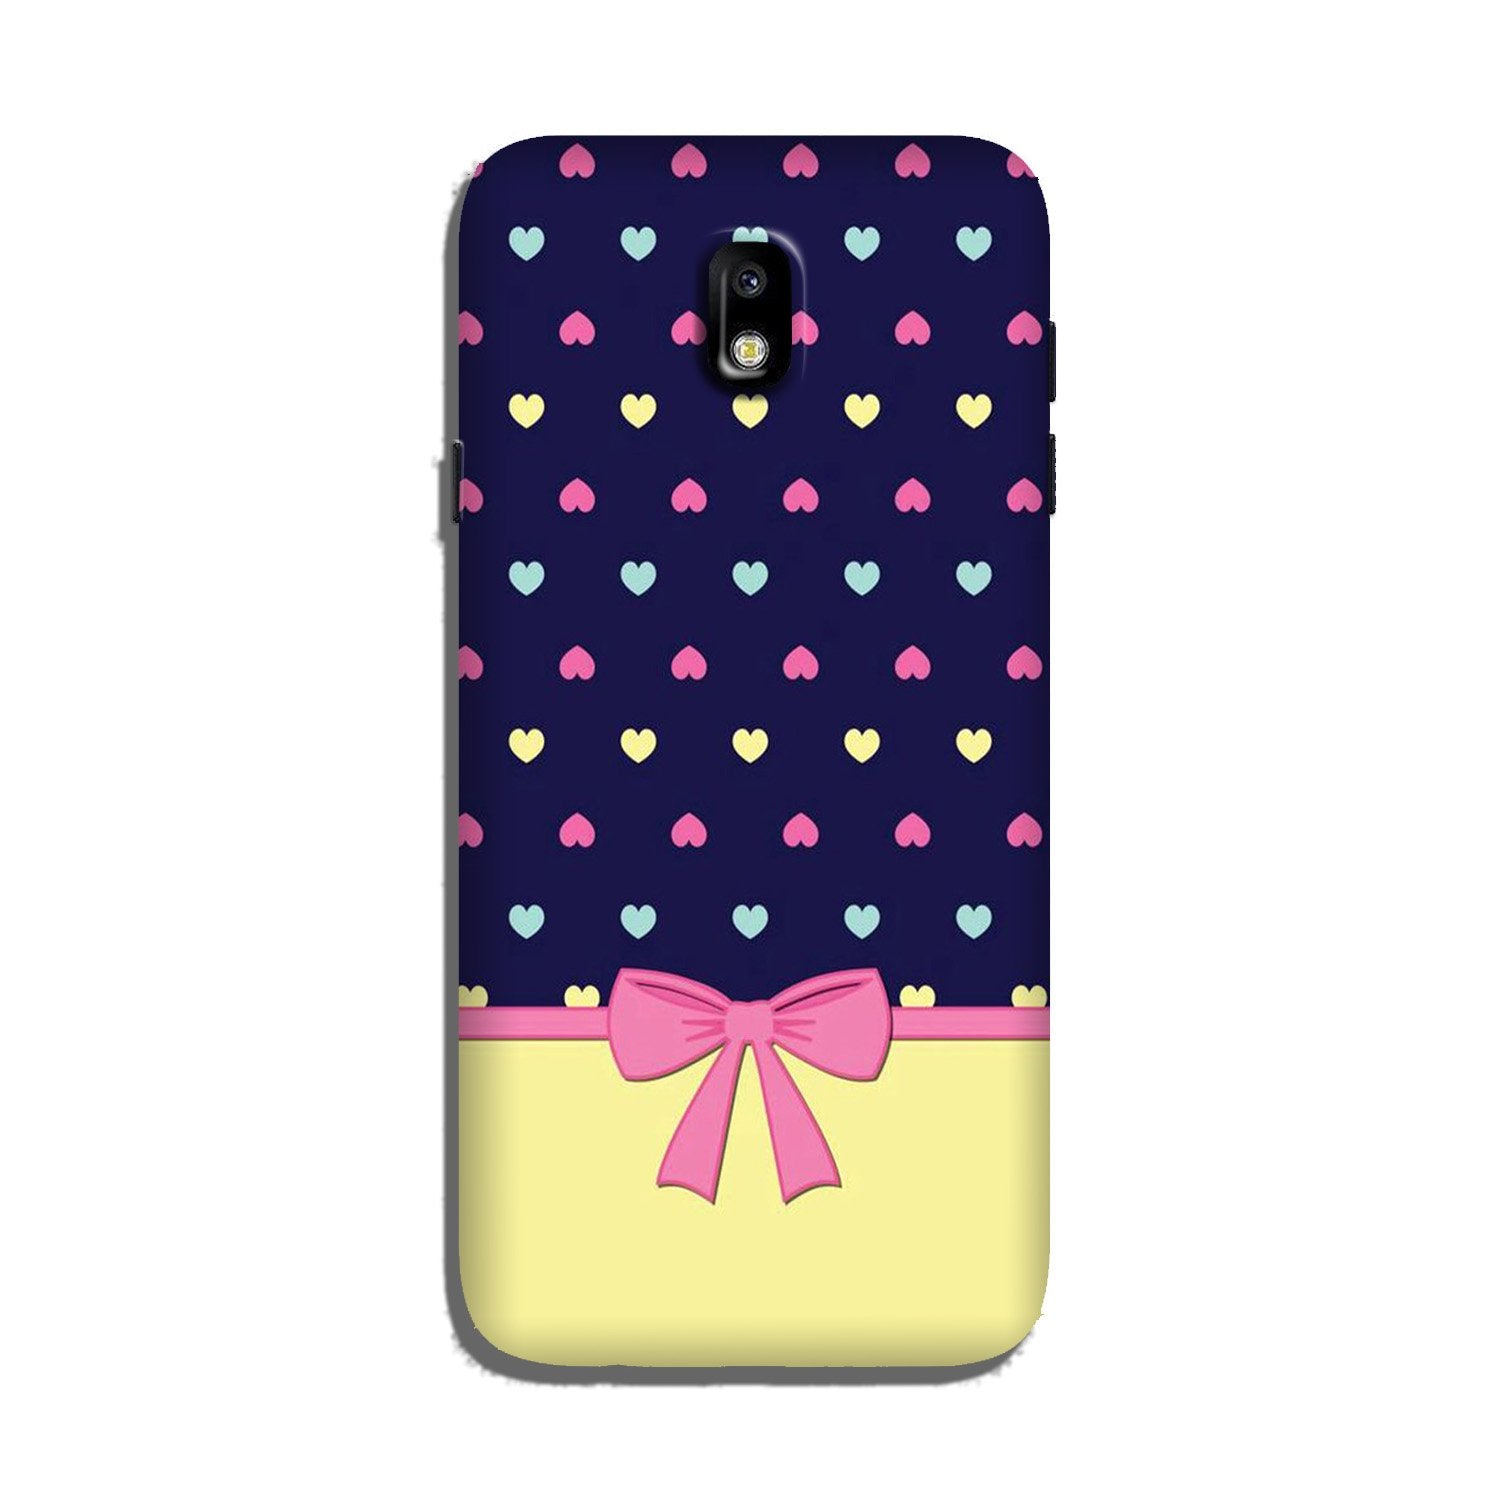 Gift Wrap5 Case for Galaxy J5 Pro